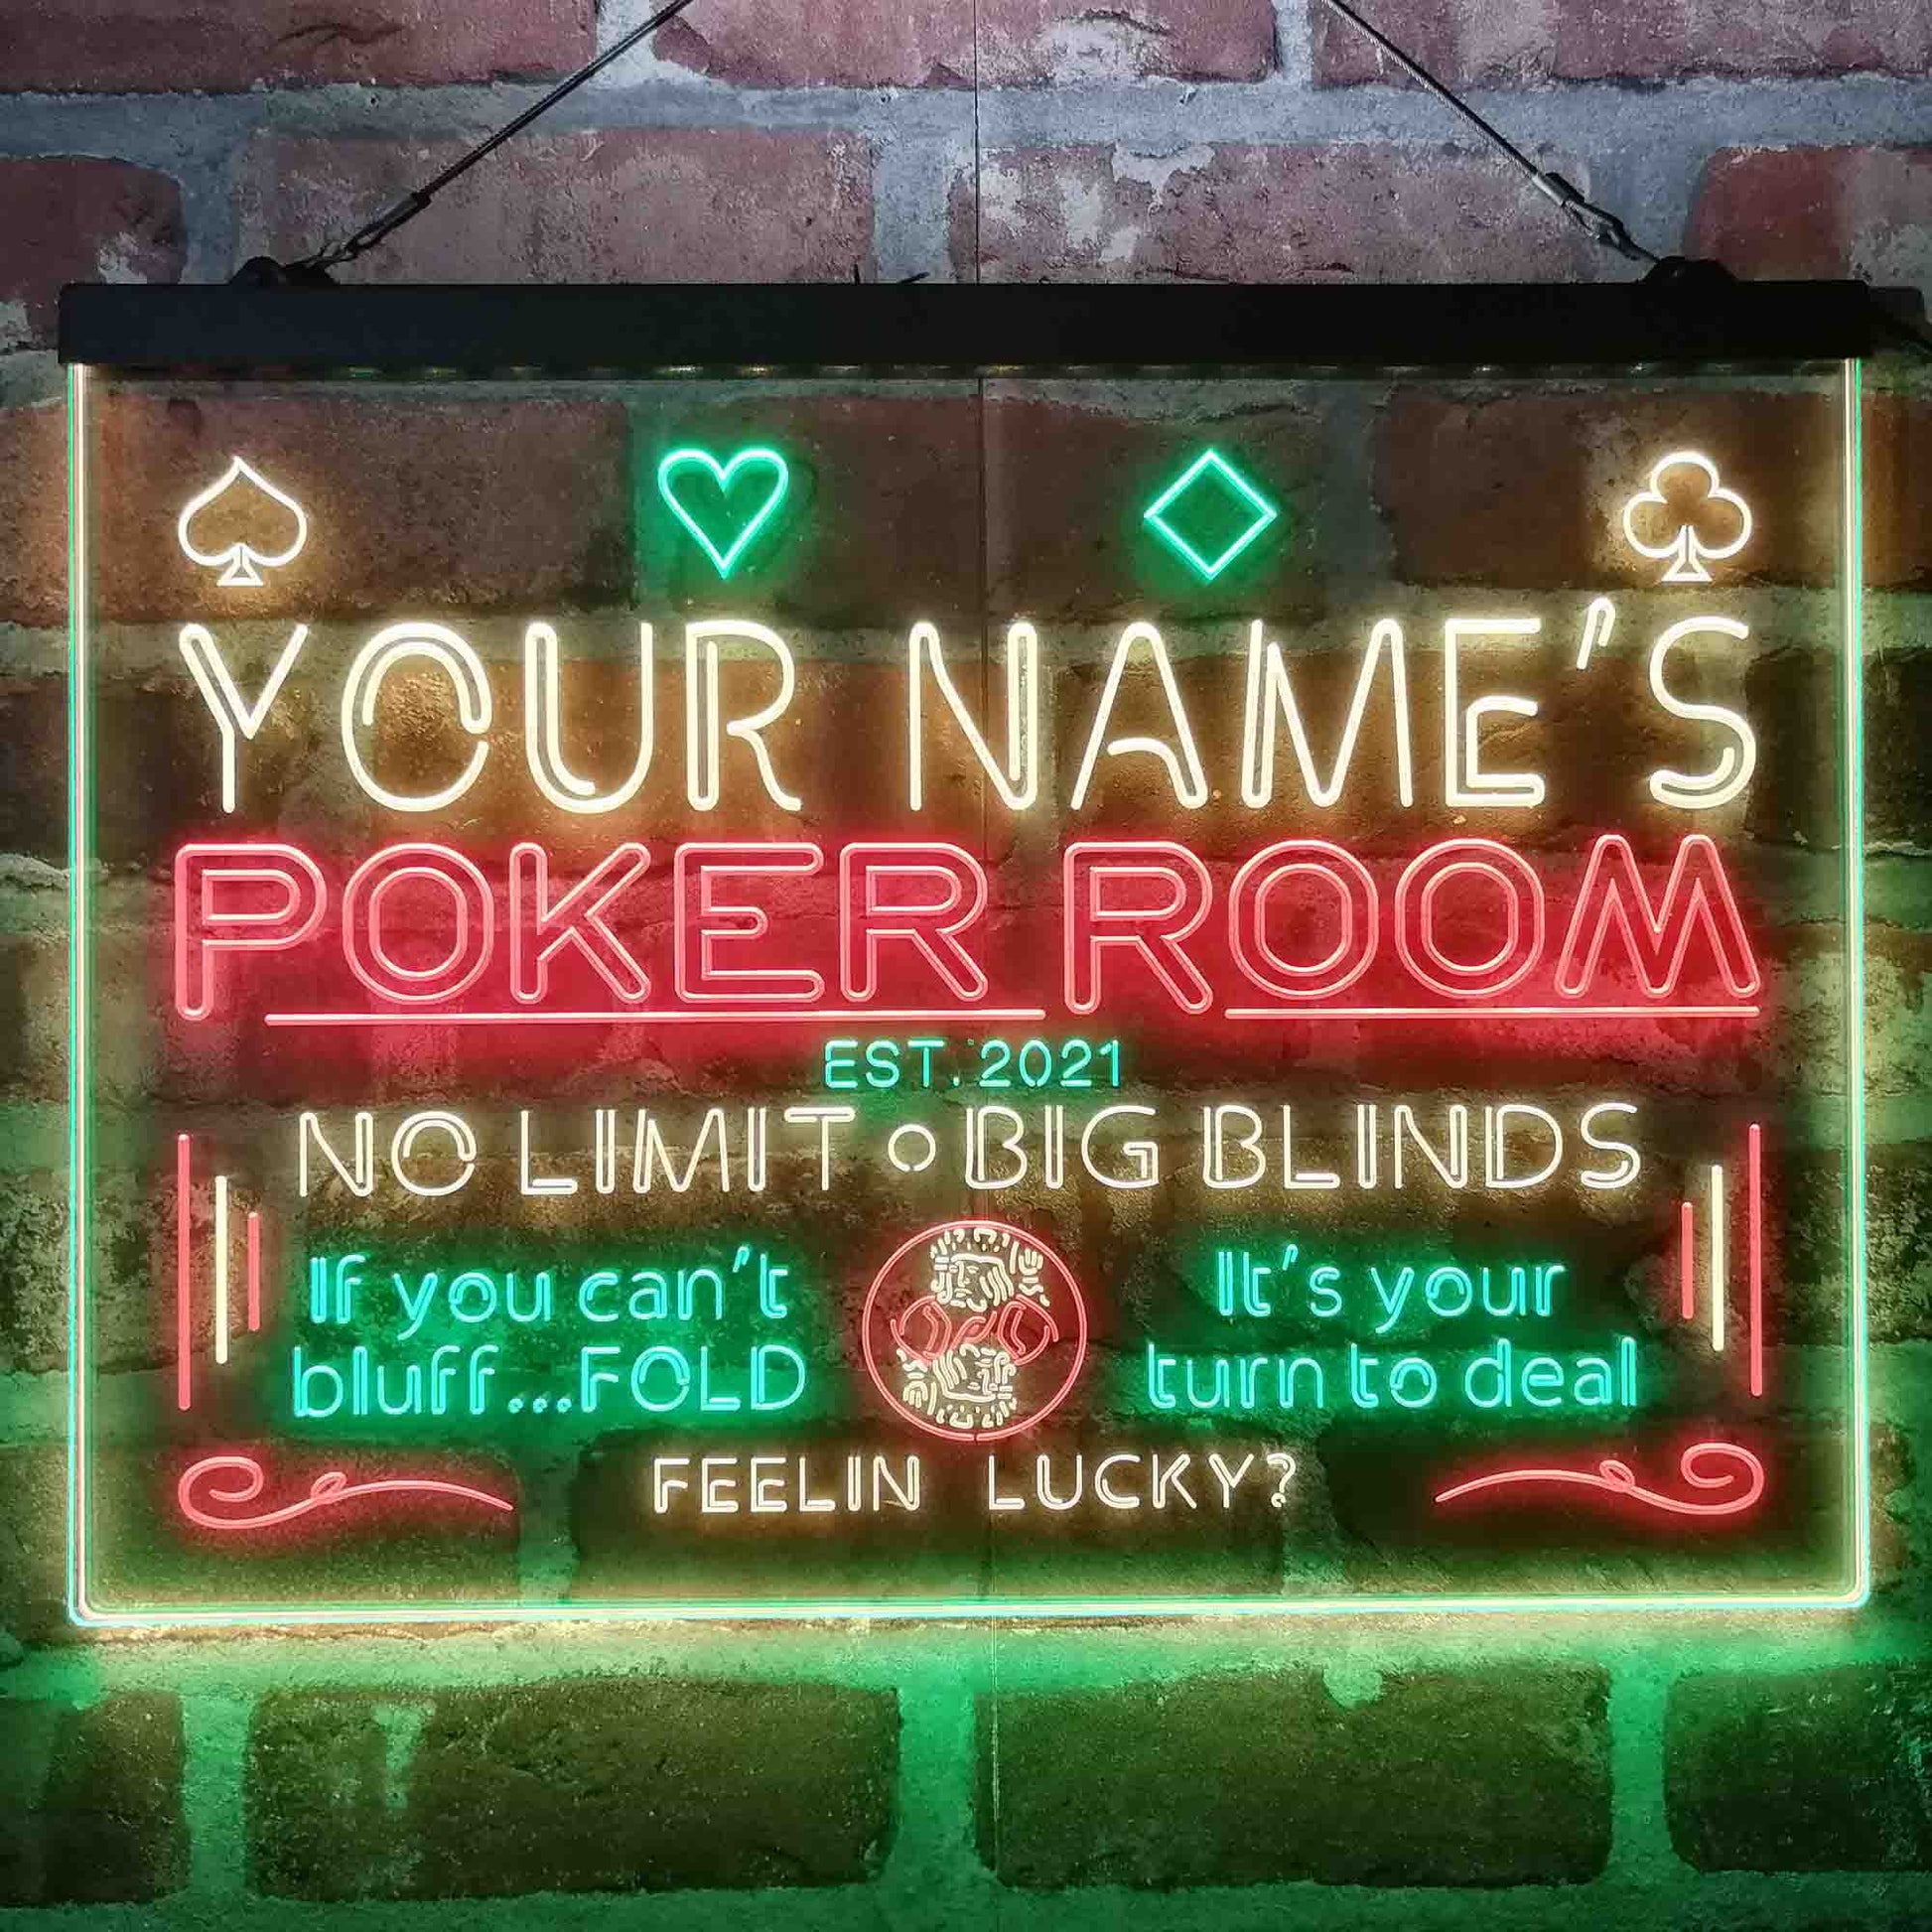 Personalized Poker Room Casino 3-Color LED Neon Light Sign - Way Up Gifts